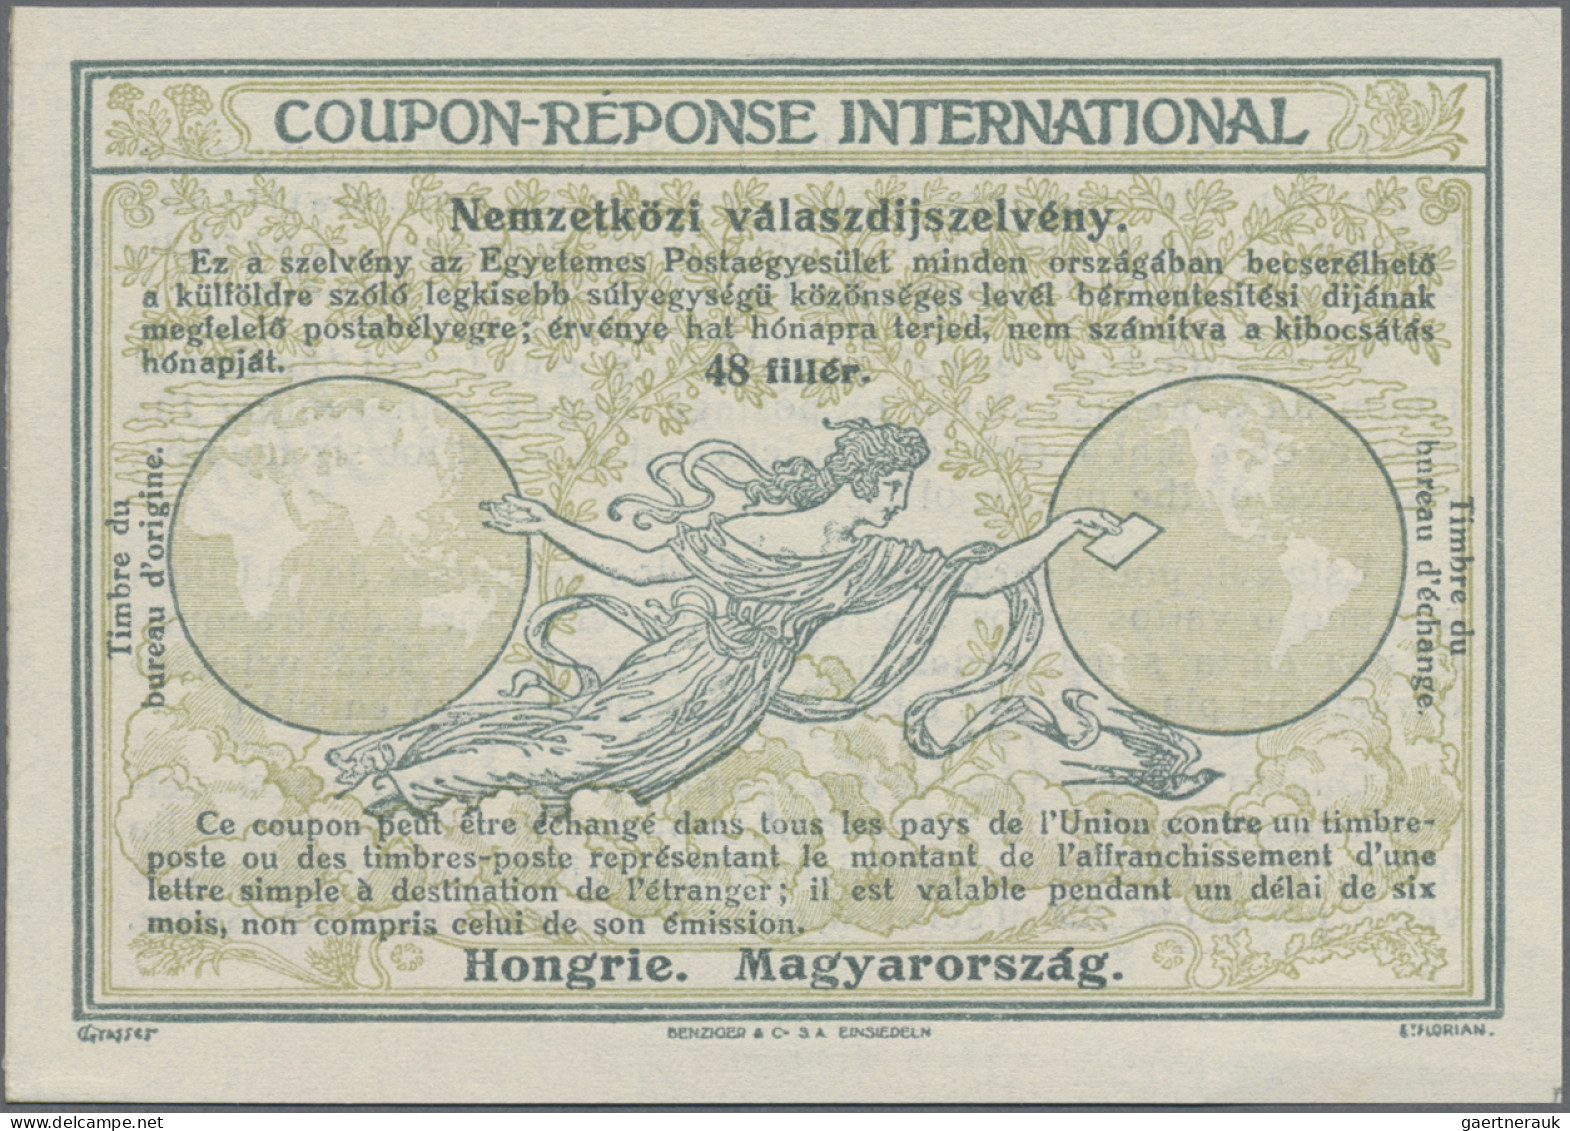 Hungary - Postal Stationary: Intern. Reply Coupon "Rome" 48f., Fine Mint. - Enteros Postales